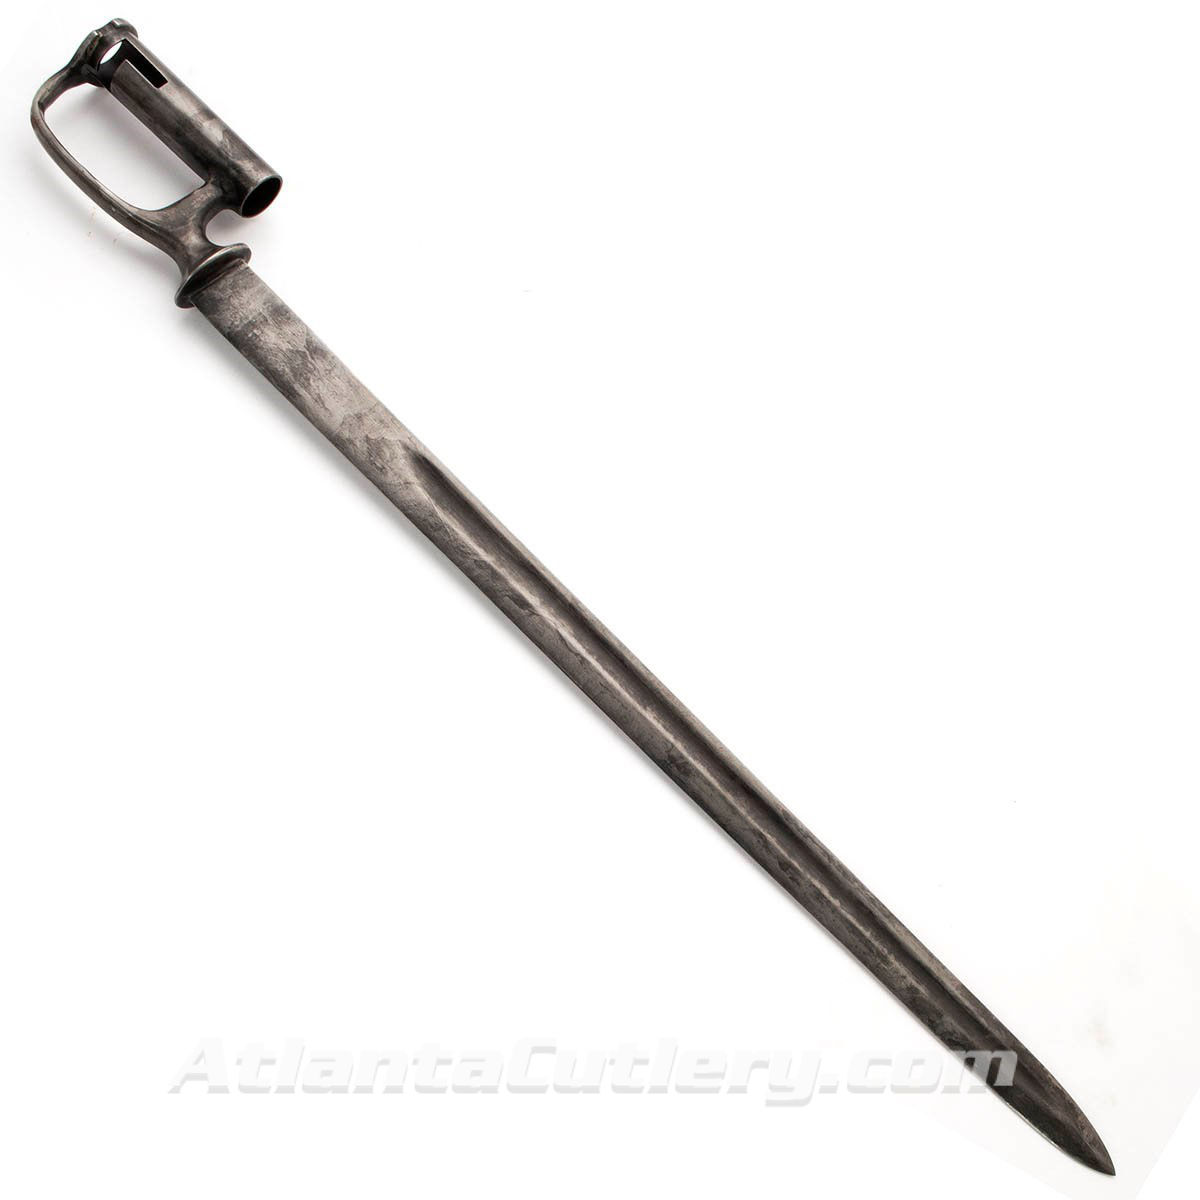 British East India Company P-1841 Sappers and Miners Model F Sword Bayonet 